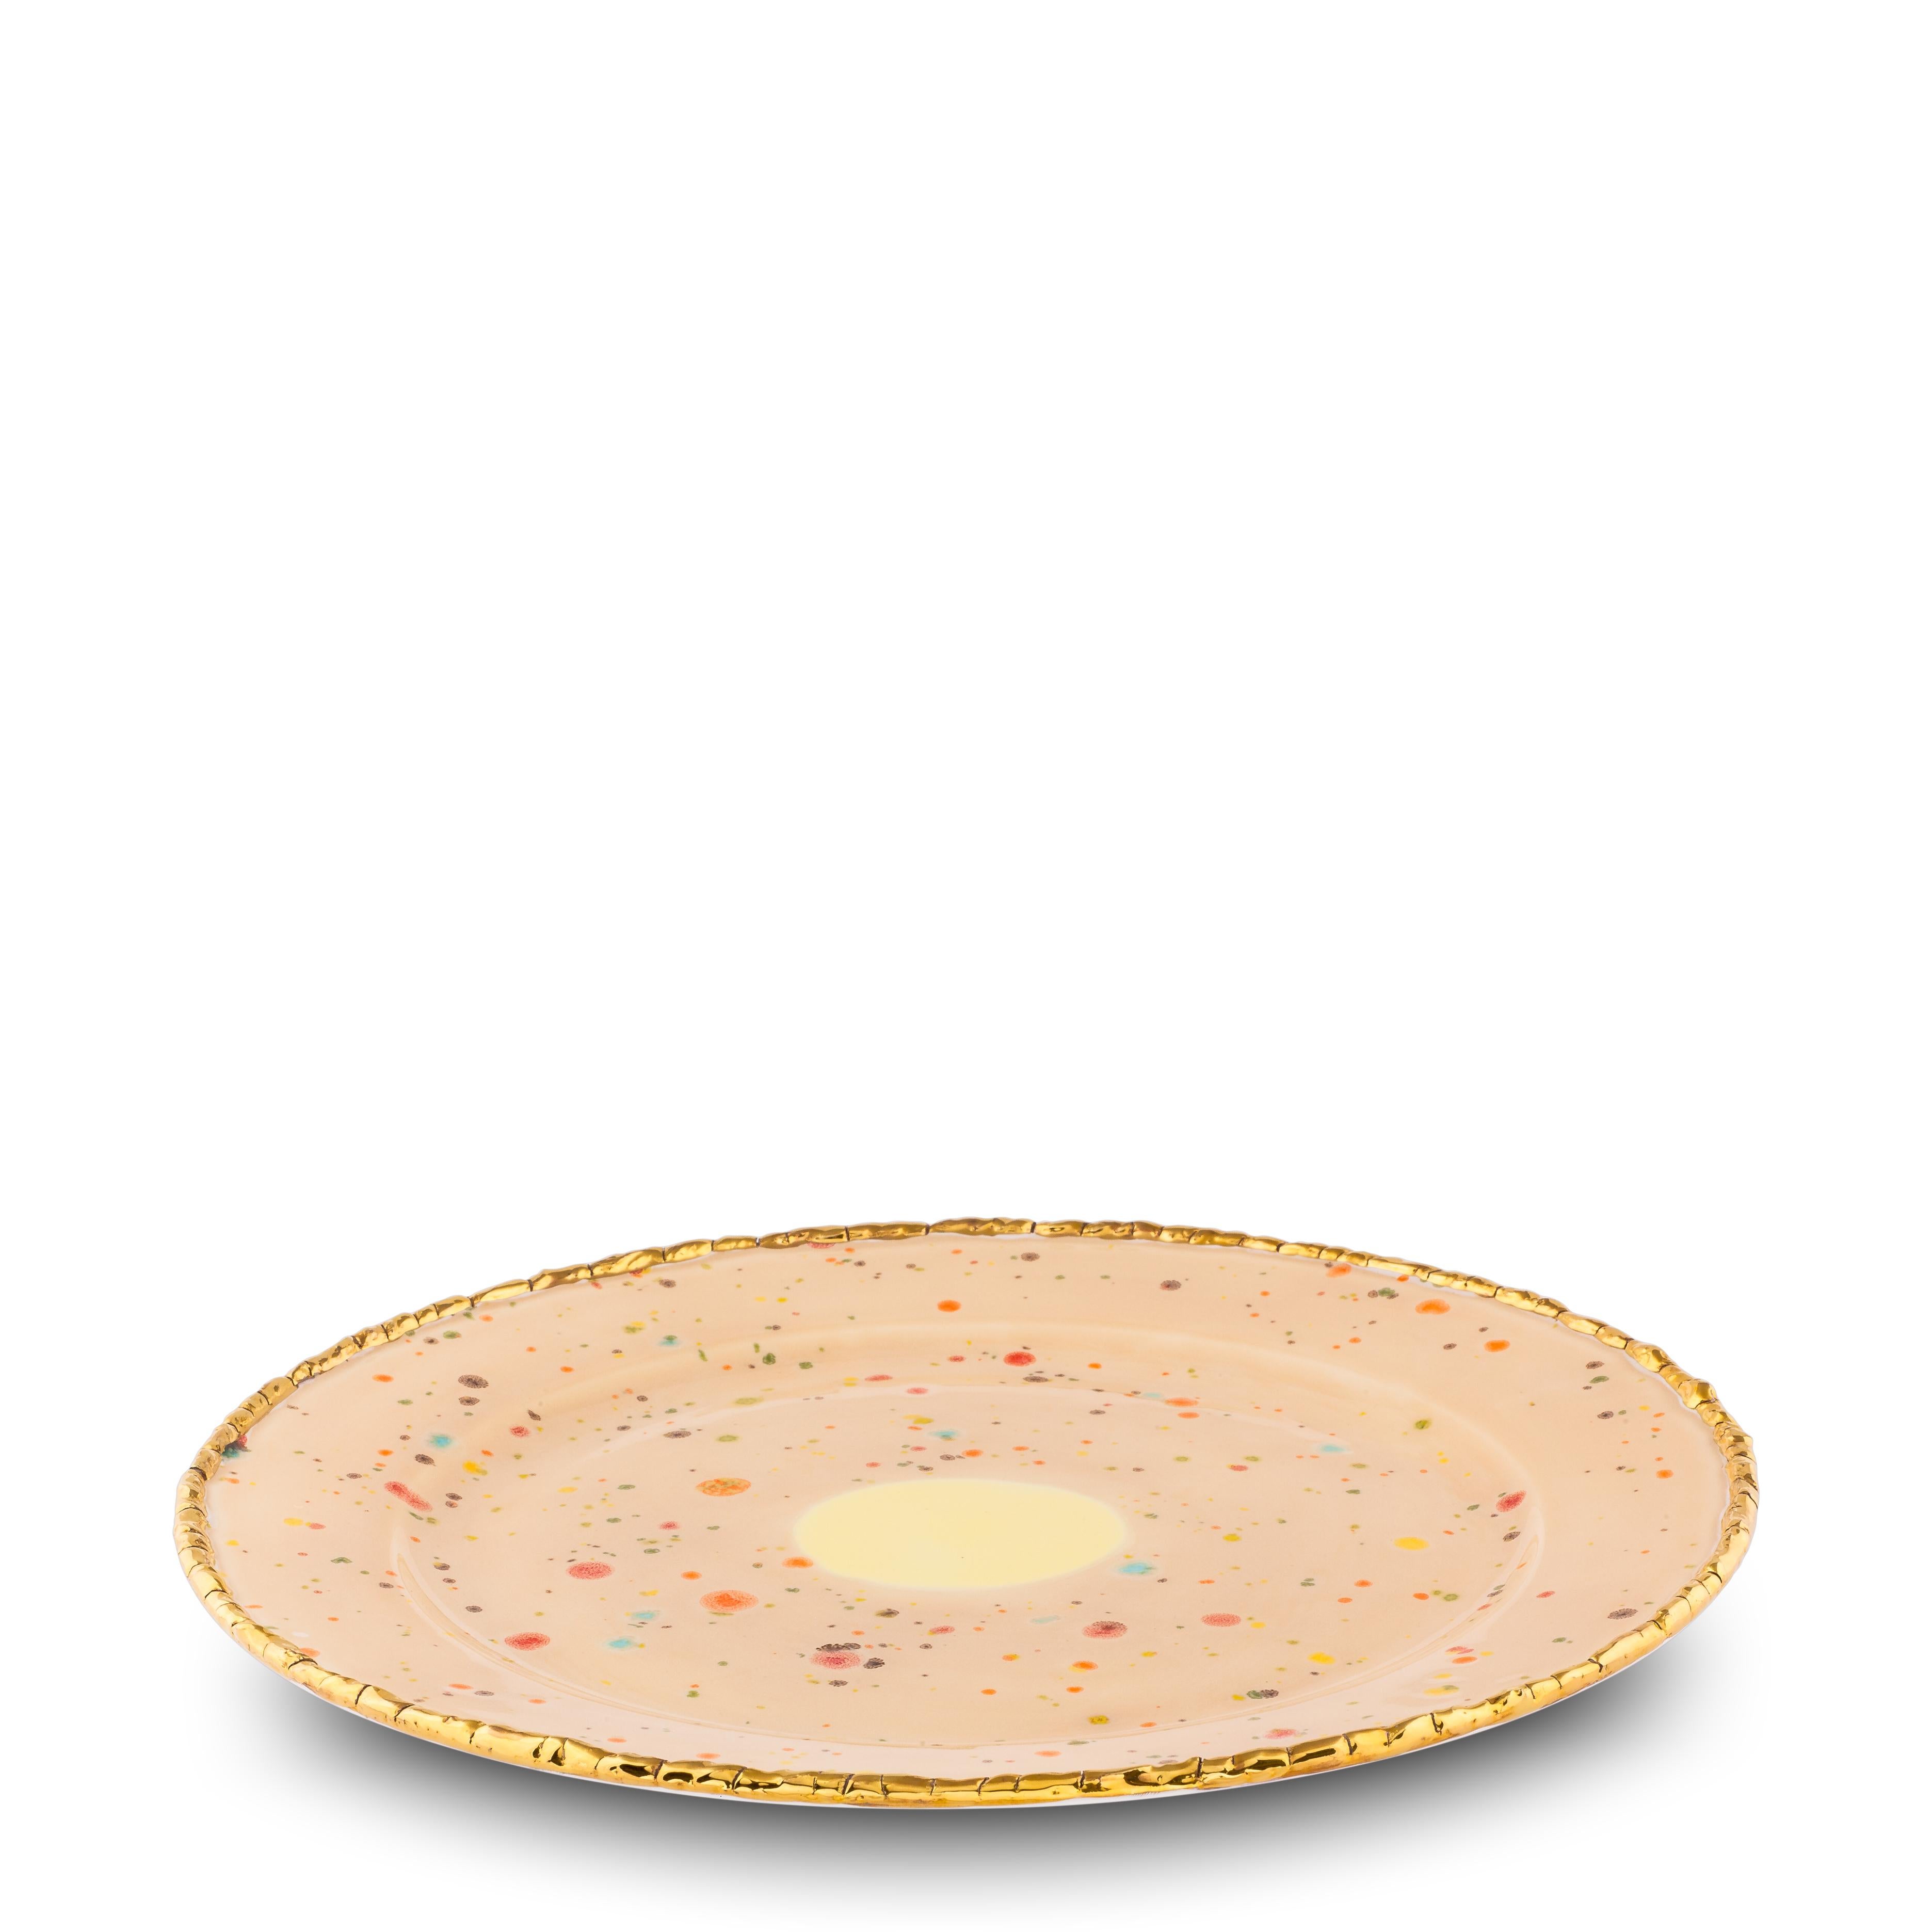 Handcrafted in Italy from the finest porcelain, this Chestnut charger plate has an original golden crackled edge emphasizes the warm sandy surface covered with little multicolor dots and the bright yellow splotch at the center.

Charger plate with